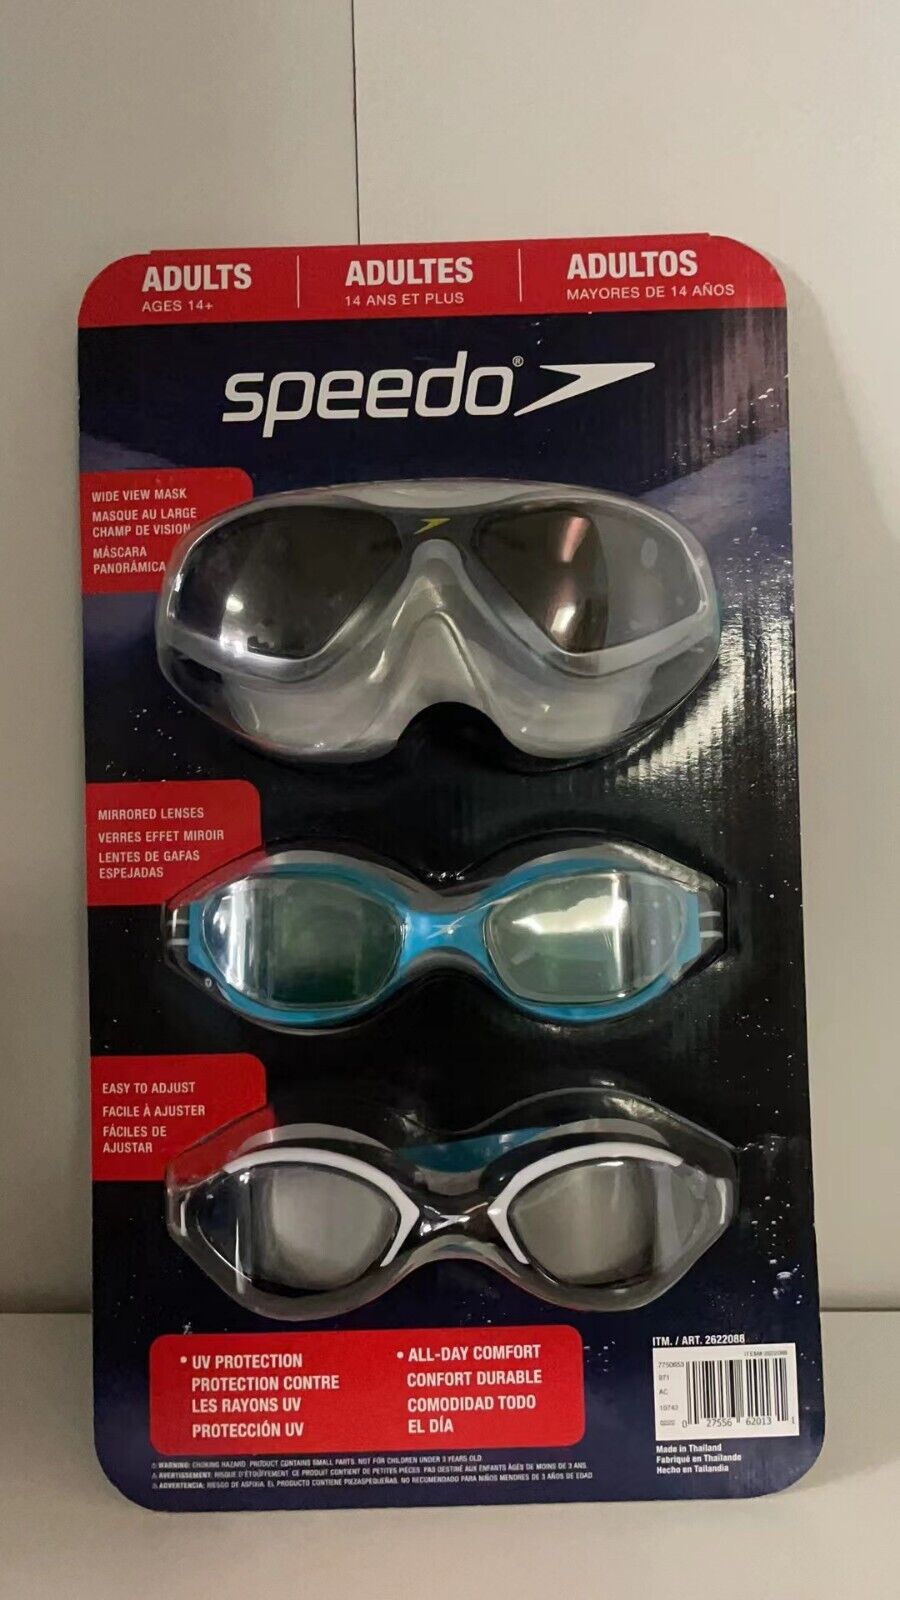 Speedo Professional Adult 14+ Swimming Goggles -3 Pack, Anti-Fog/UV Protection